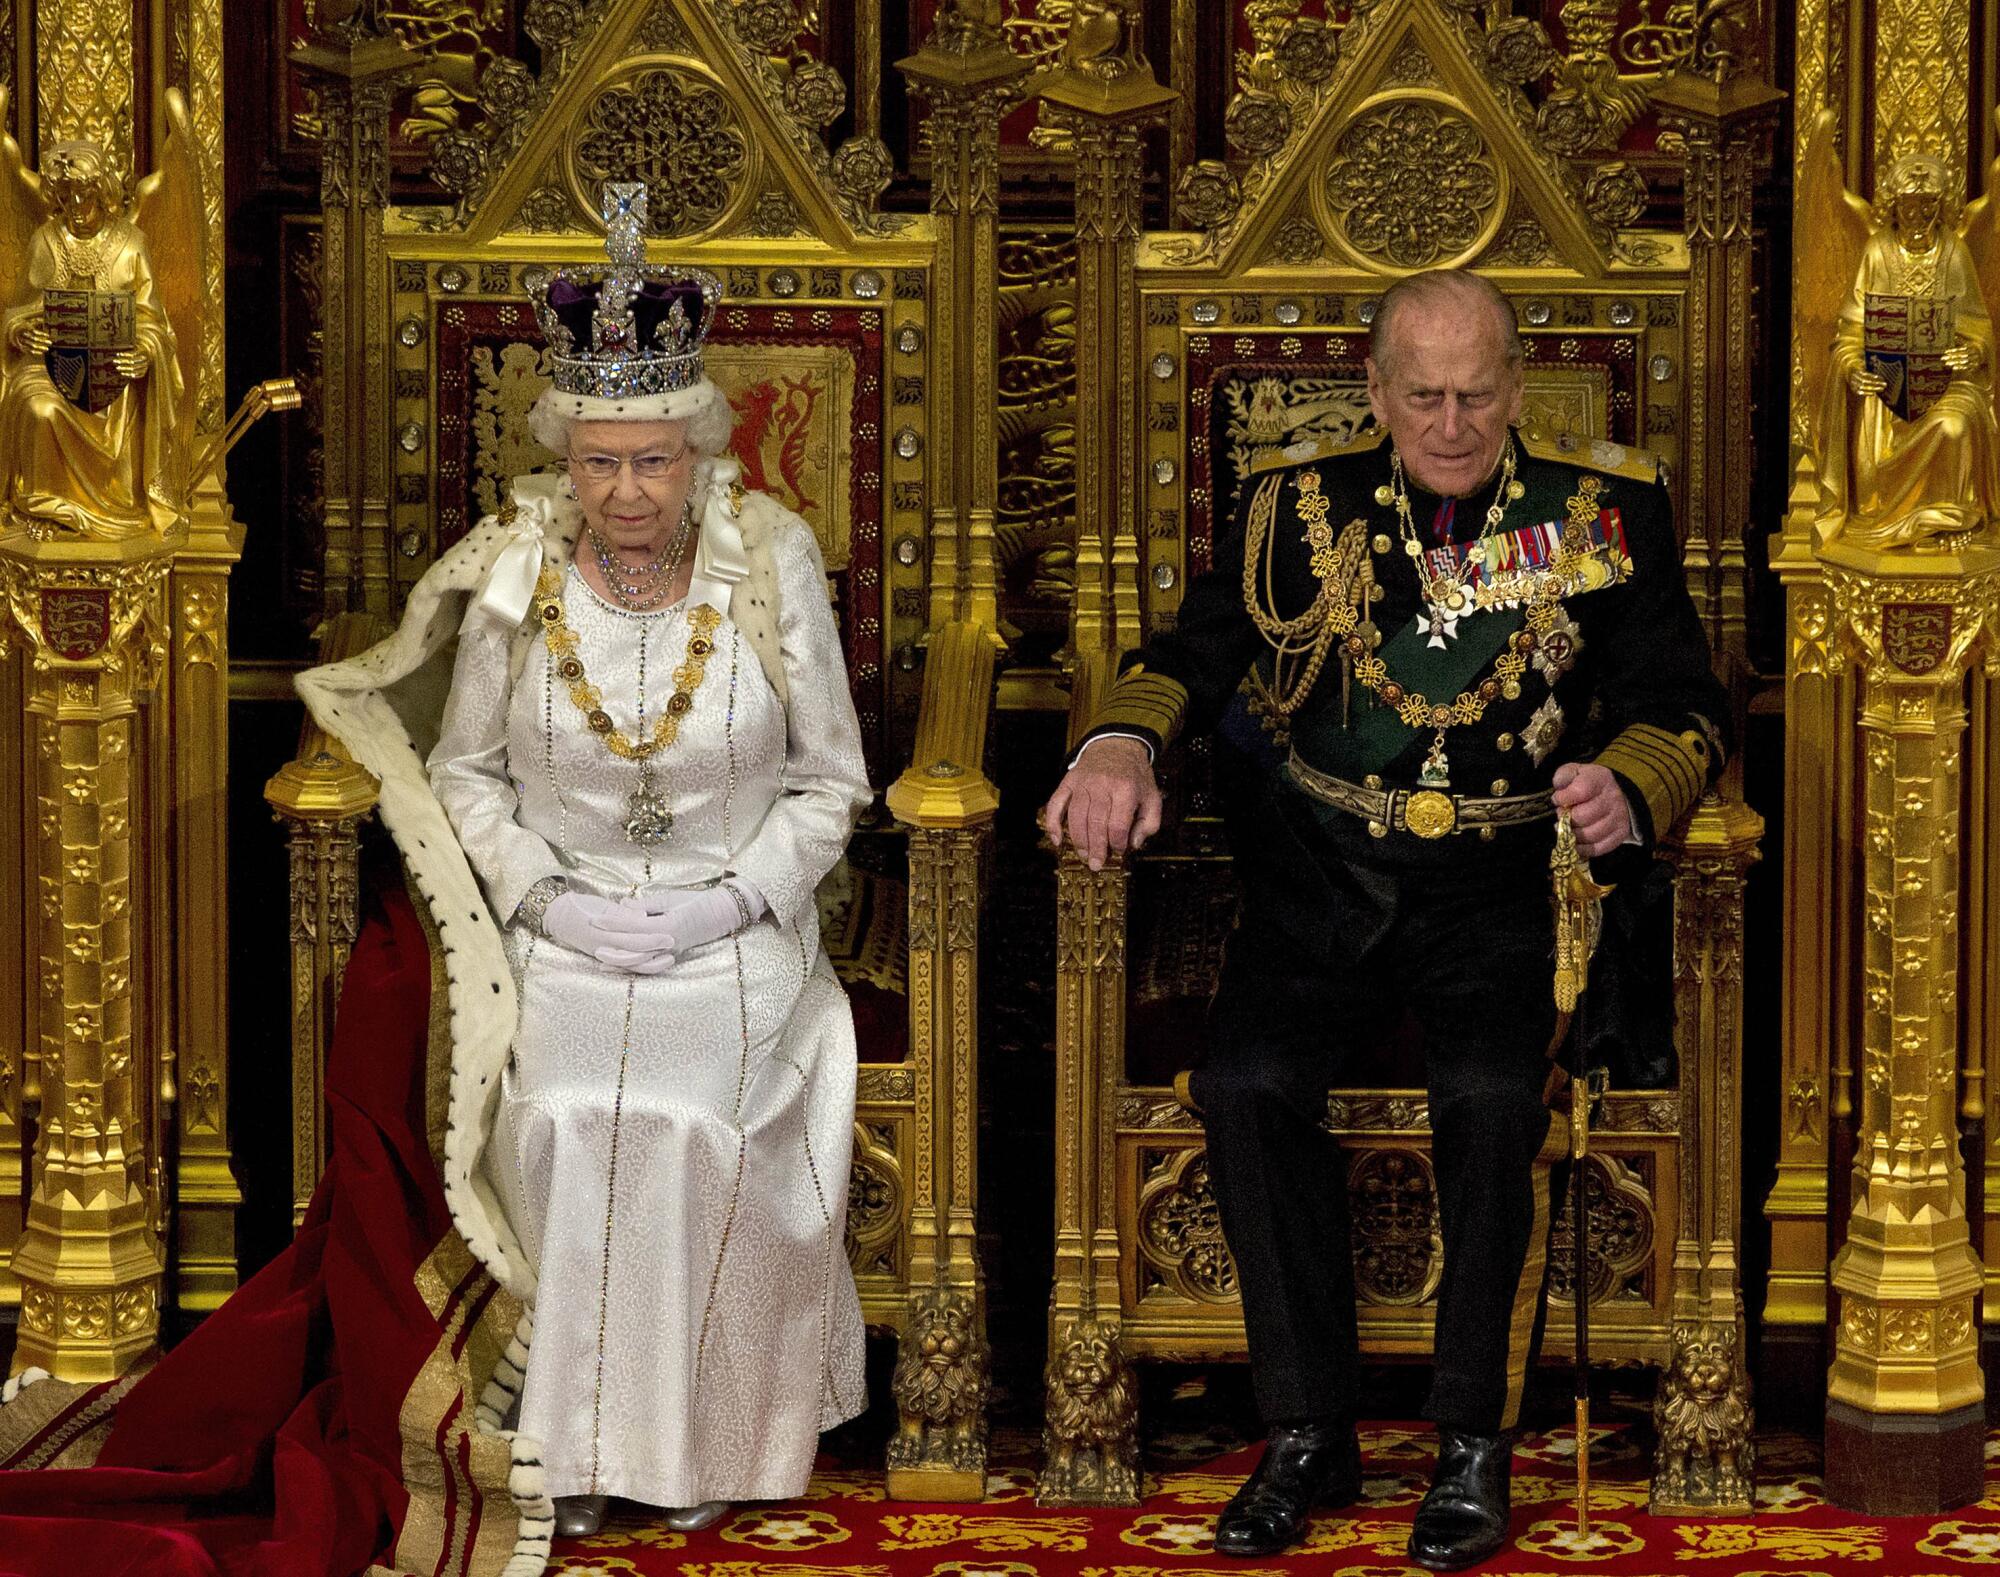 Queen Elizabeth II and Prince Philip in full regalia in the House of Lords